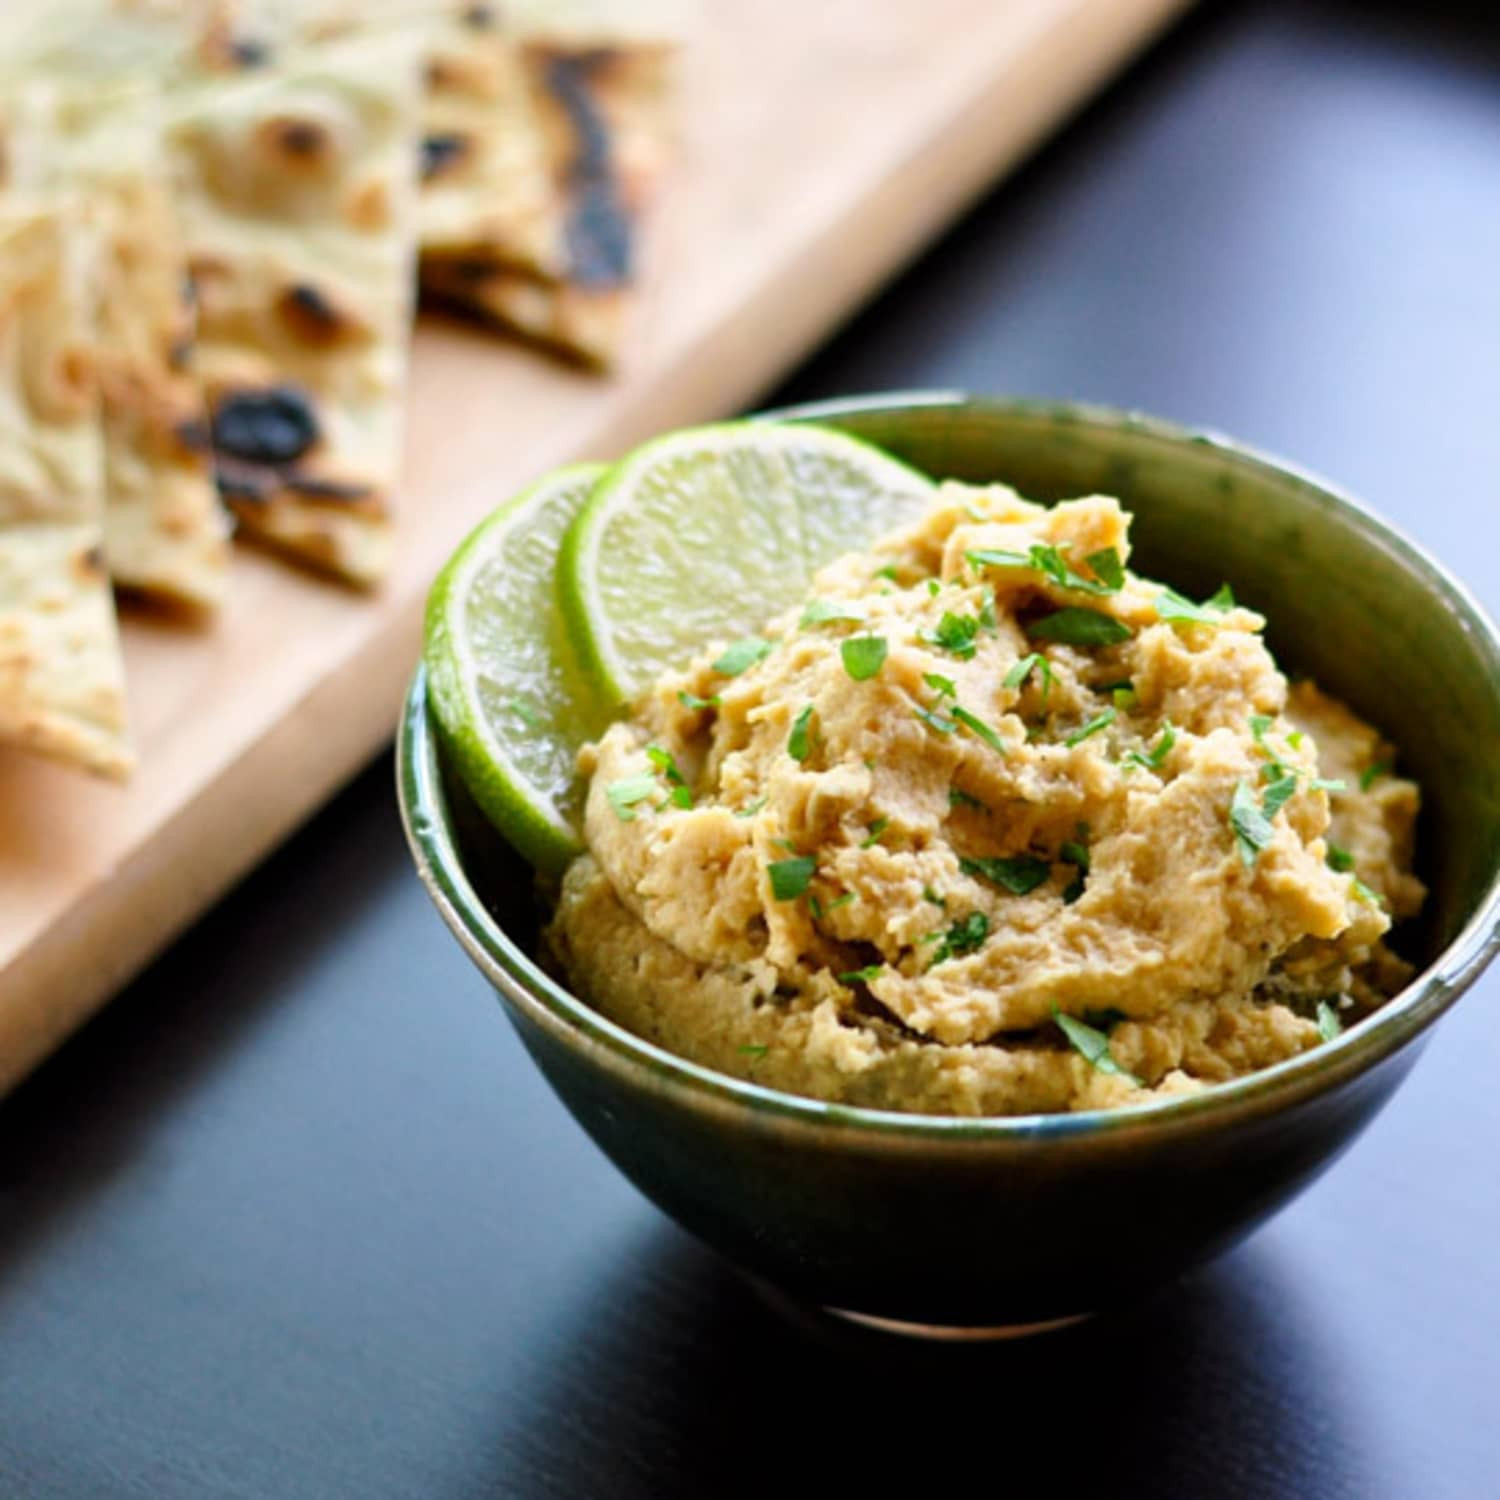 Appetizers without Cheese Best Of 10 Scrumptious Appetizer Dips &amp; Spreads without Cheese